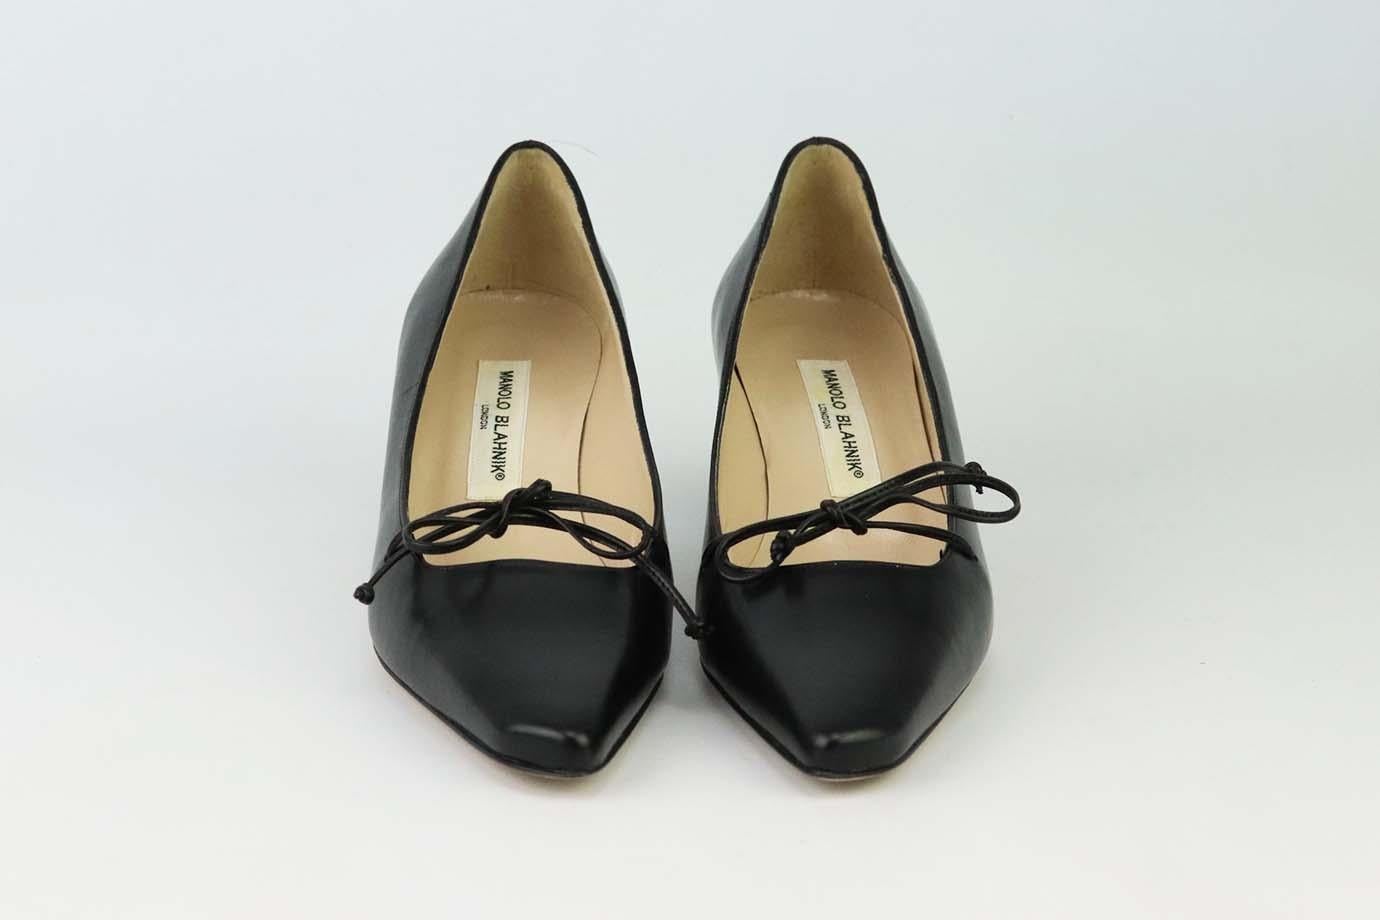 These Vintage pumps by Manolo Blahnik are a classic style that will never date, made in Italy from supple black leather, they have sharp slanted pointed toes, leather bow and comfortable 38 mm heels to take you from morning meetings to dinner with